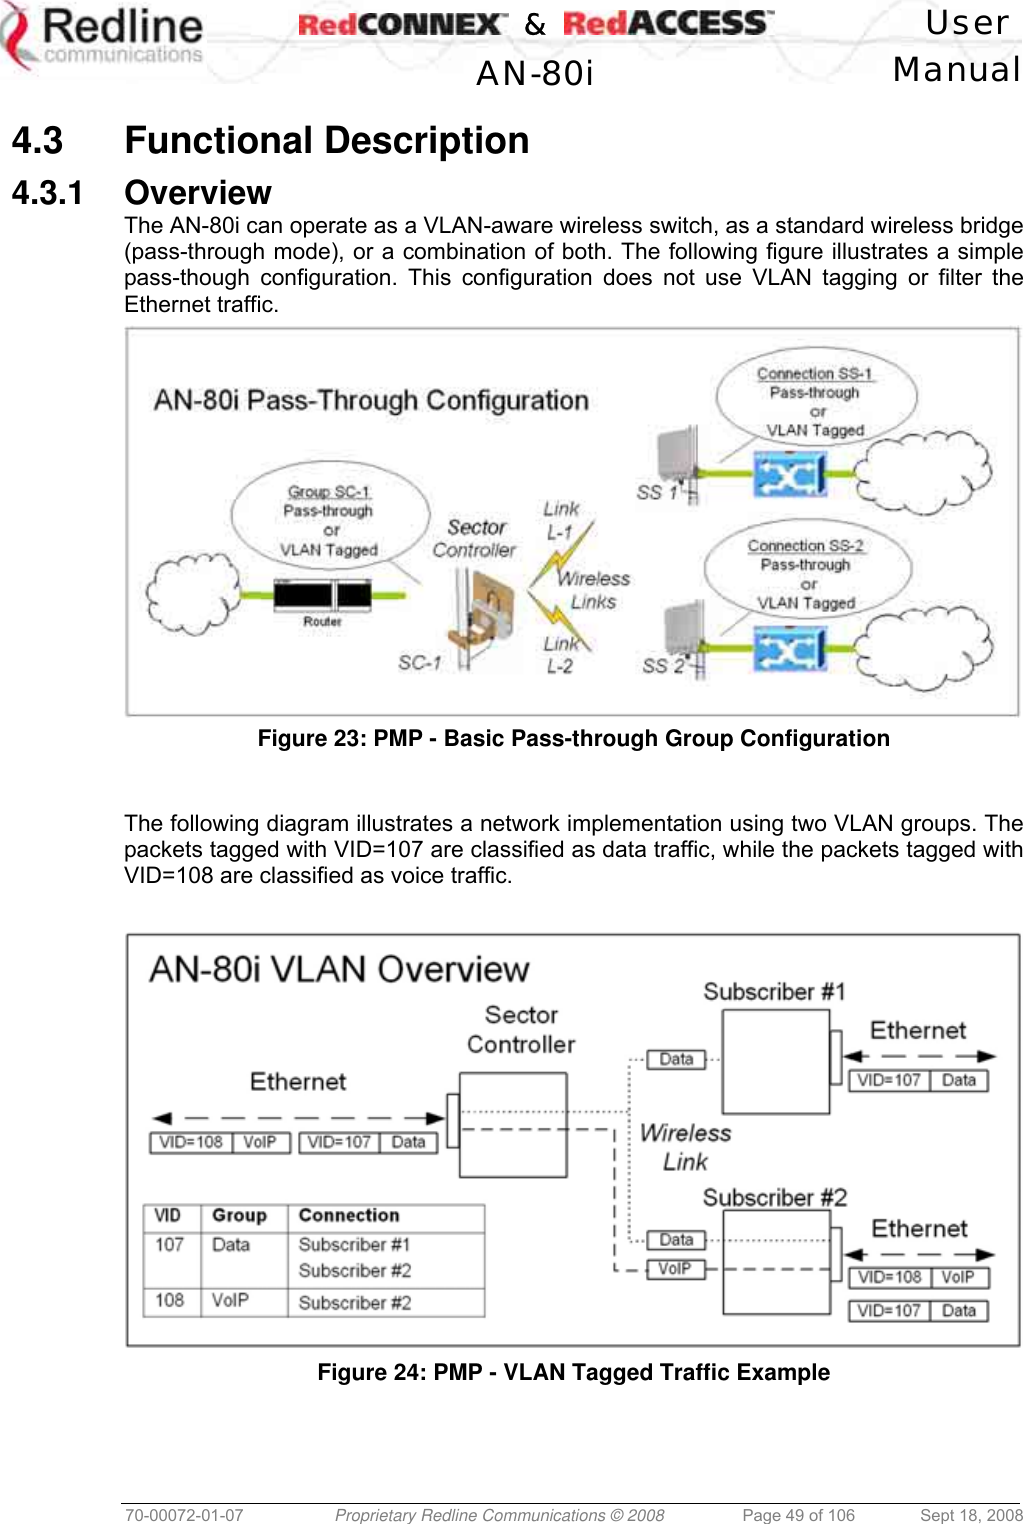    &amp;  User  AN-80i Manual  70-00072-01-07  Proprietary Redline Communications © 2008  Page 49 of 106  Sept 18, 2008  4.3 Functional Description 4.3.1 Overview The AN-80i can operate as a VLAN-aware wireless switch, as a standard wireless bridge (pass-through mode), or a combination of both. The following figure illustrates a simple pass-though configuration. This configuration does not use VLAN tagging or filter the Ethernet traffic.  Figure 23: PMP - Basic Pass-through Group Configuration   The following diagram illustrates a network implementation using two VLAN groups. The packets tagged with VID=107 are classified as data traffic, while the packets tagged with VID=108 are classified as voice traffic.    Figure 24: PMP - VLAN Tagged Traffic Example   